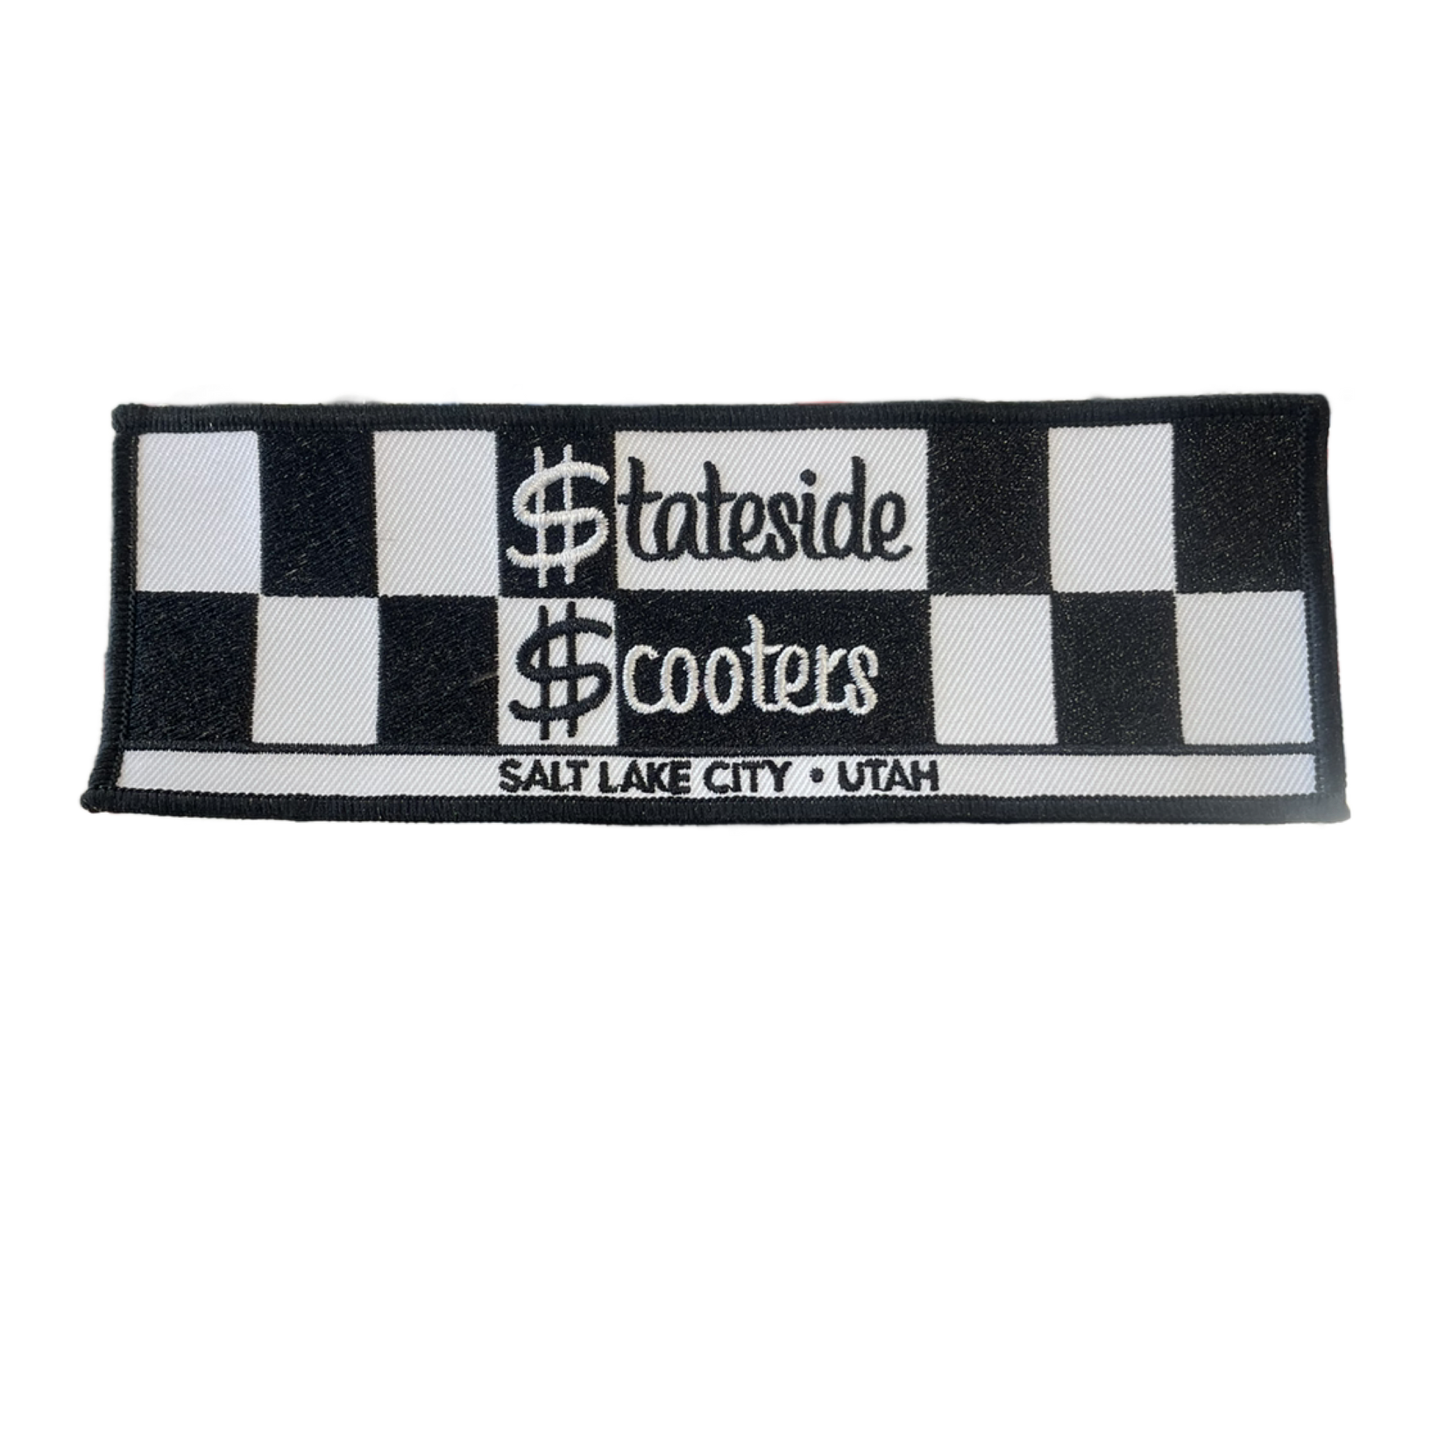 Stateside Scooters Embroidered Patch 2